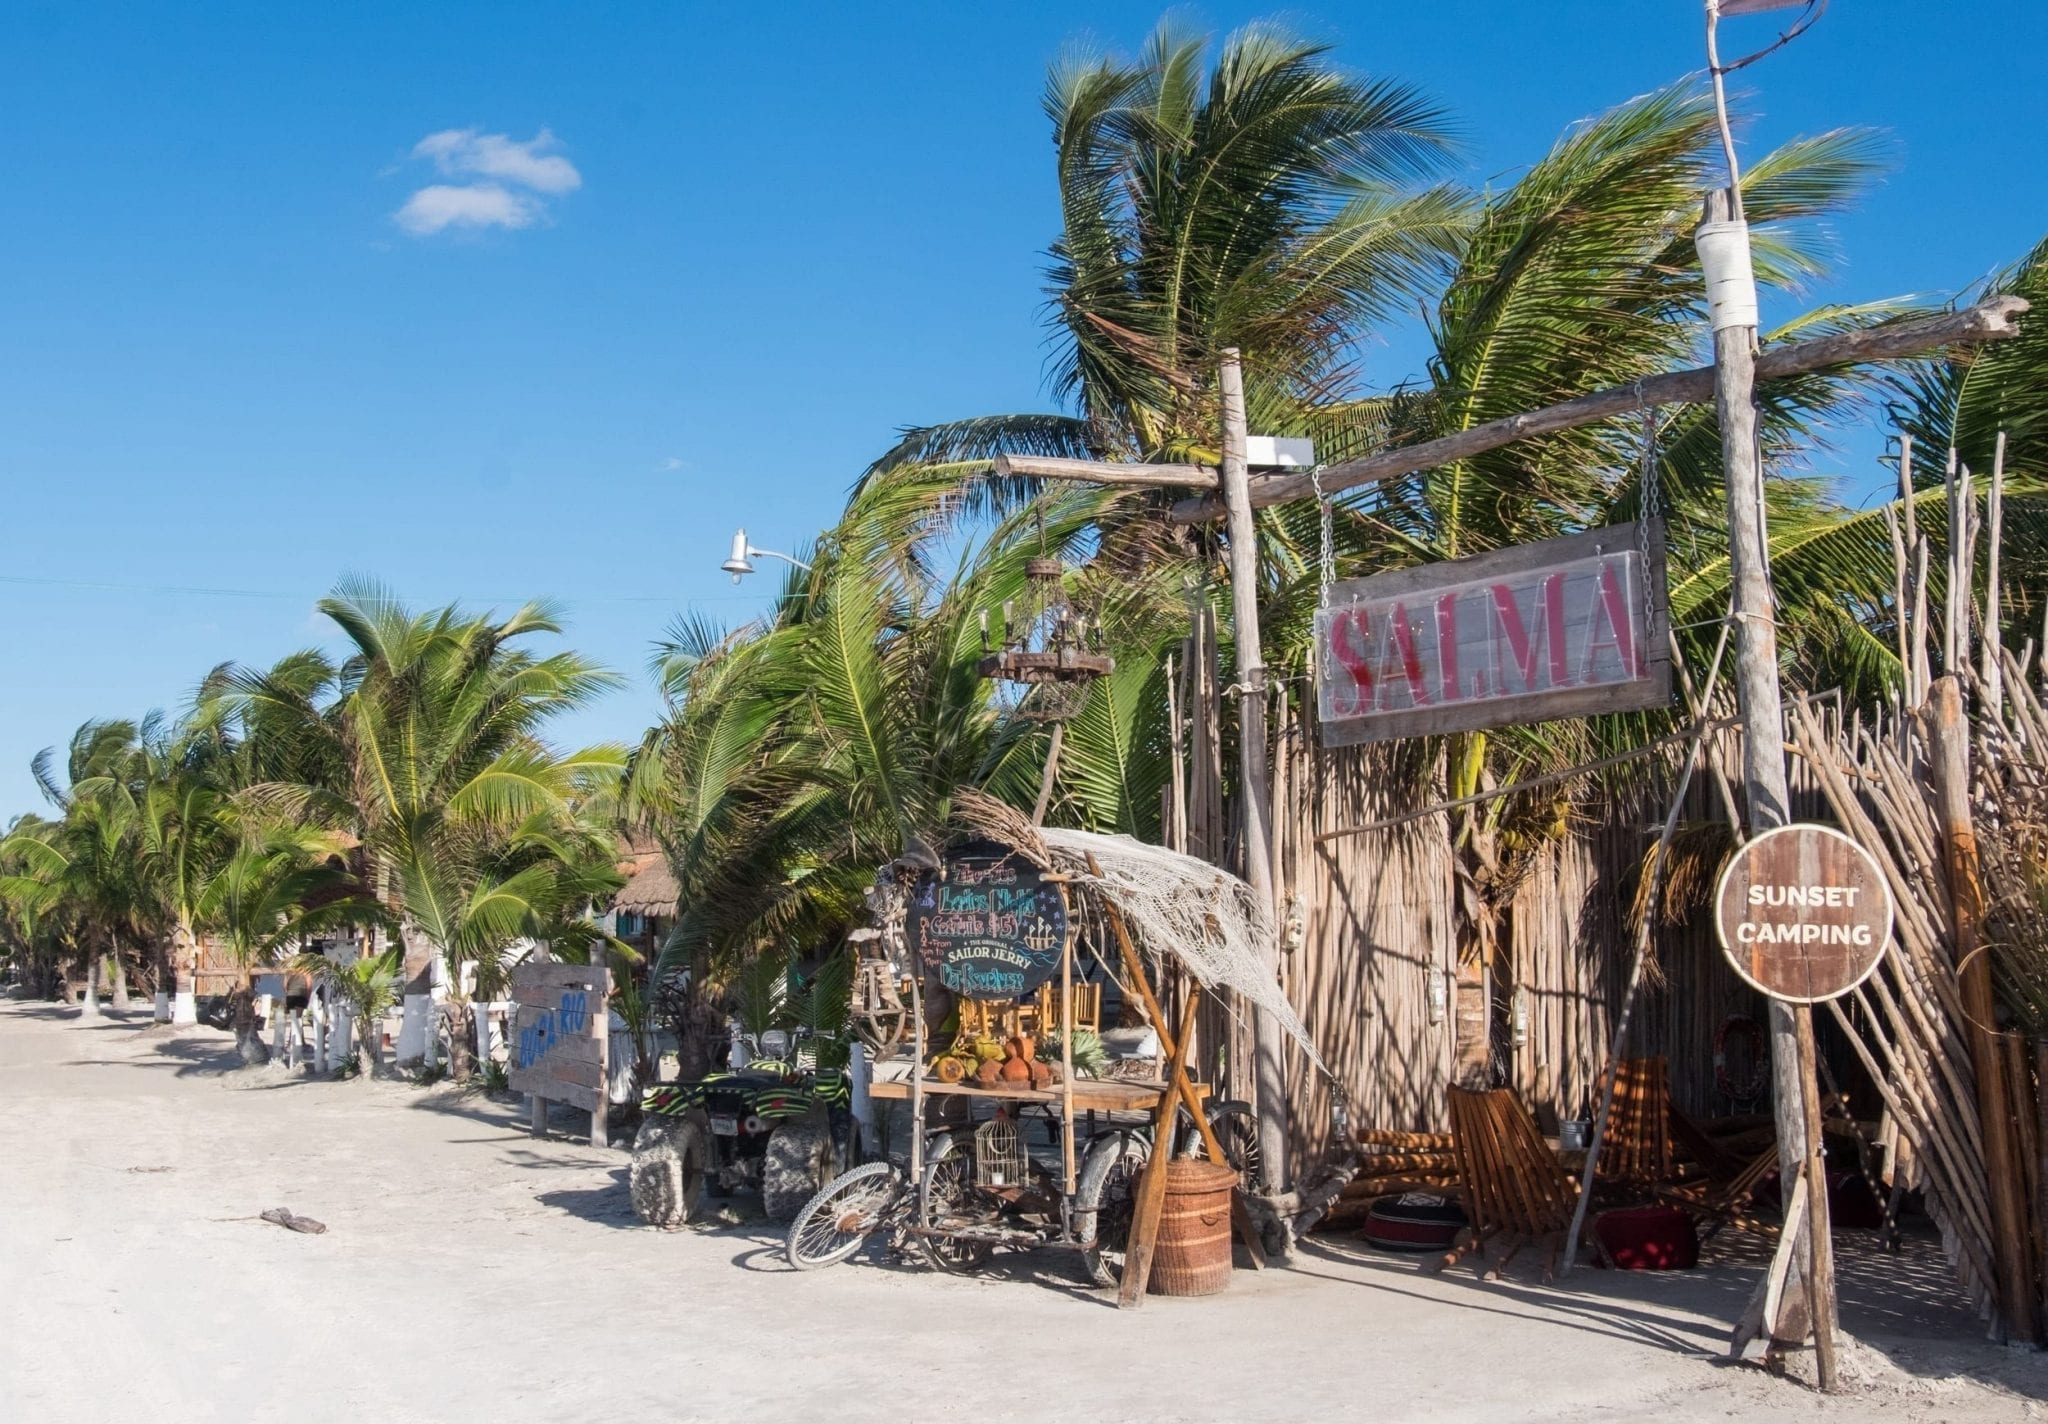 Ramshackle restaurants and bars on the beach, surrounded by palm trees.